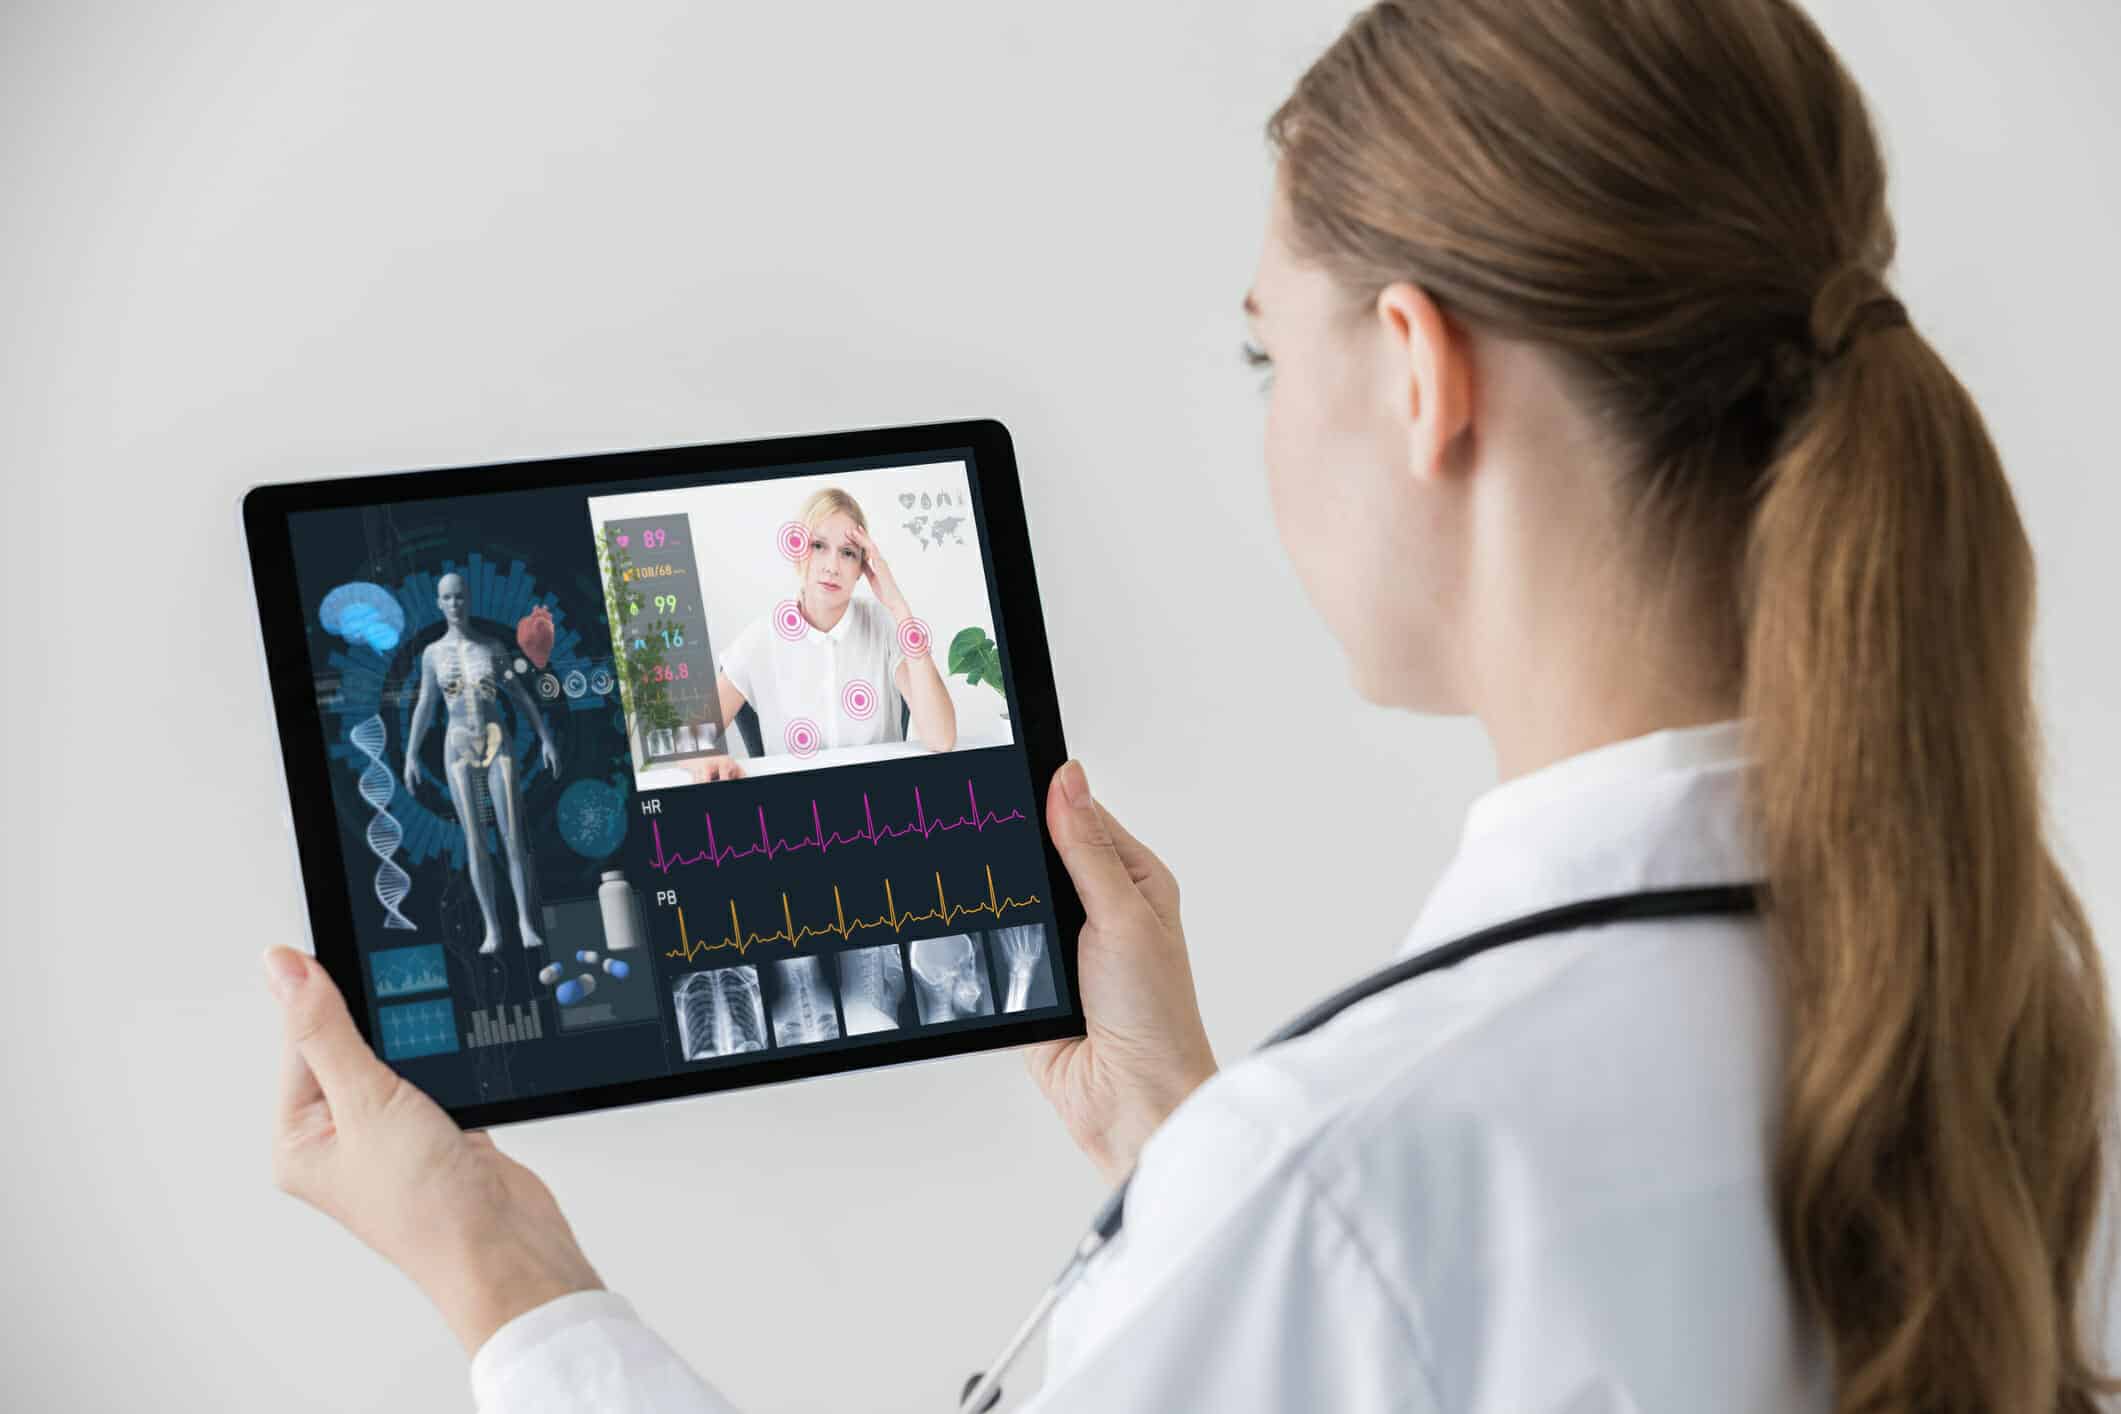 This way a video conference between doctor and patient could look like